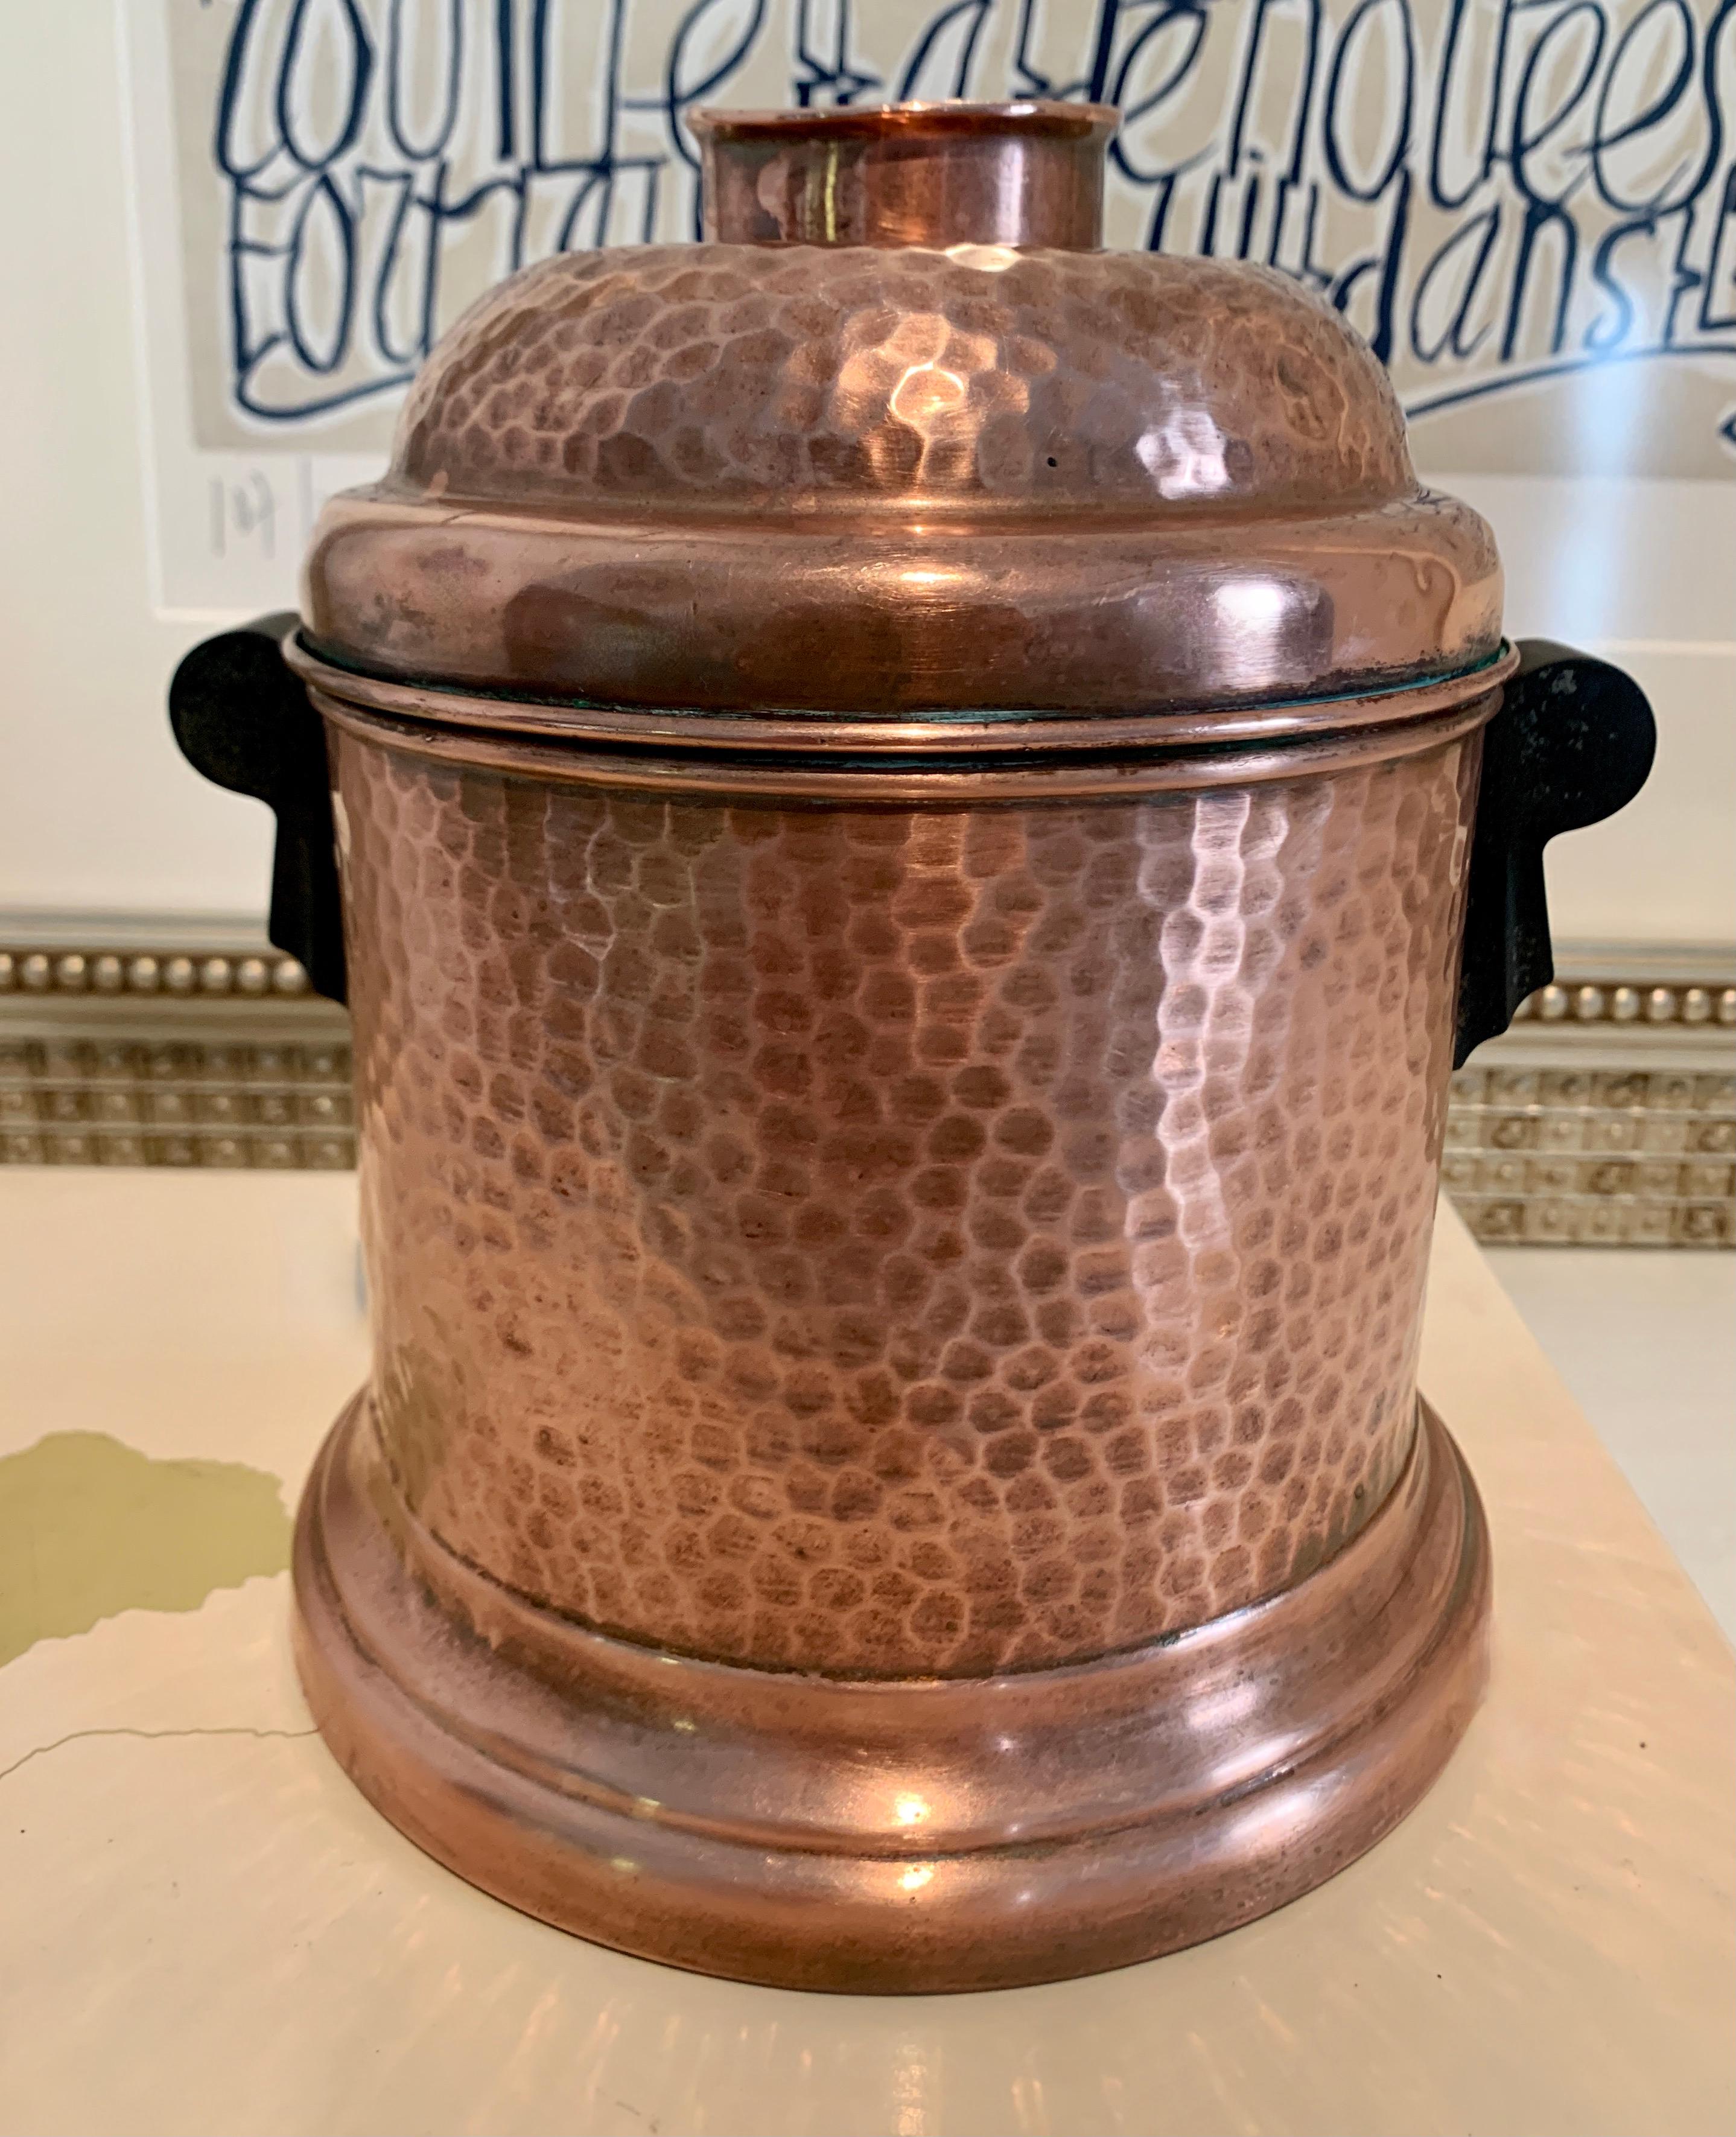 A large hammered copper Humidor with Removable lid and Bakelite Handles. The piece is large enough for your tobacco, cigars, or even use it as a desk accessory or for tea! The copper is hammered and has decorative Bakelite handles. The removable lid